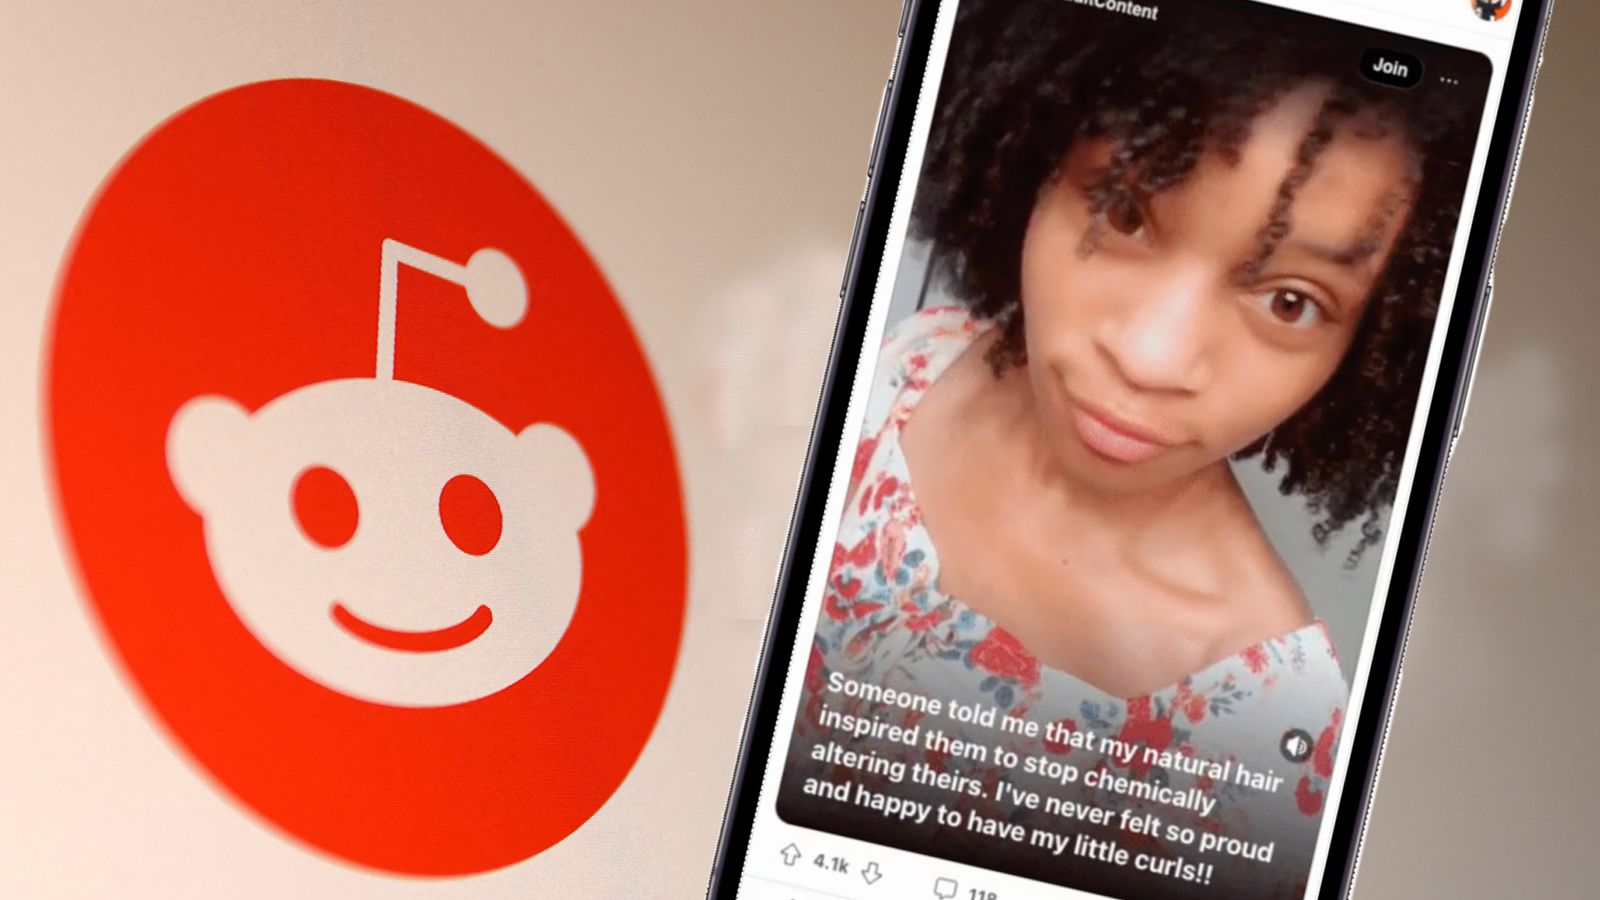 Big changes are coming to Reddit